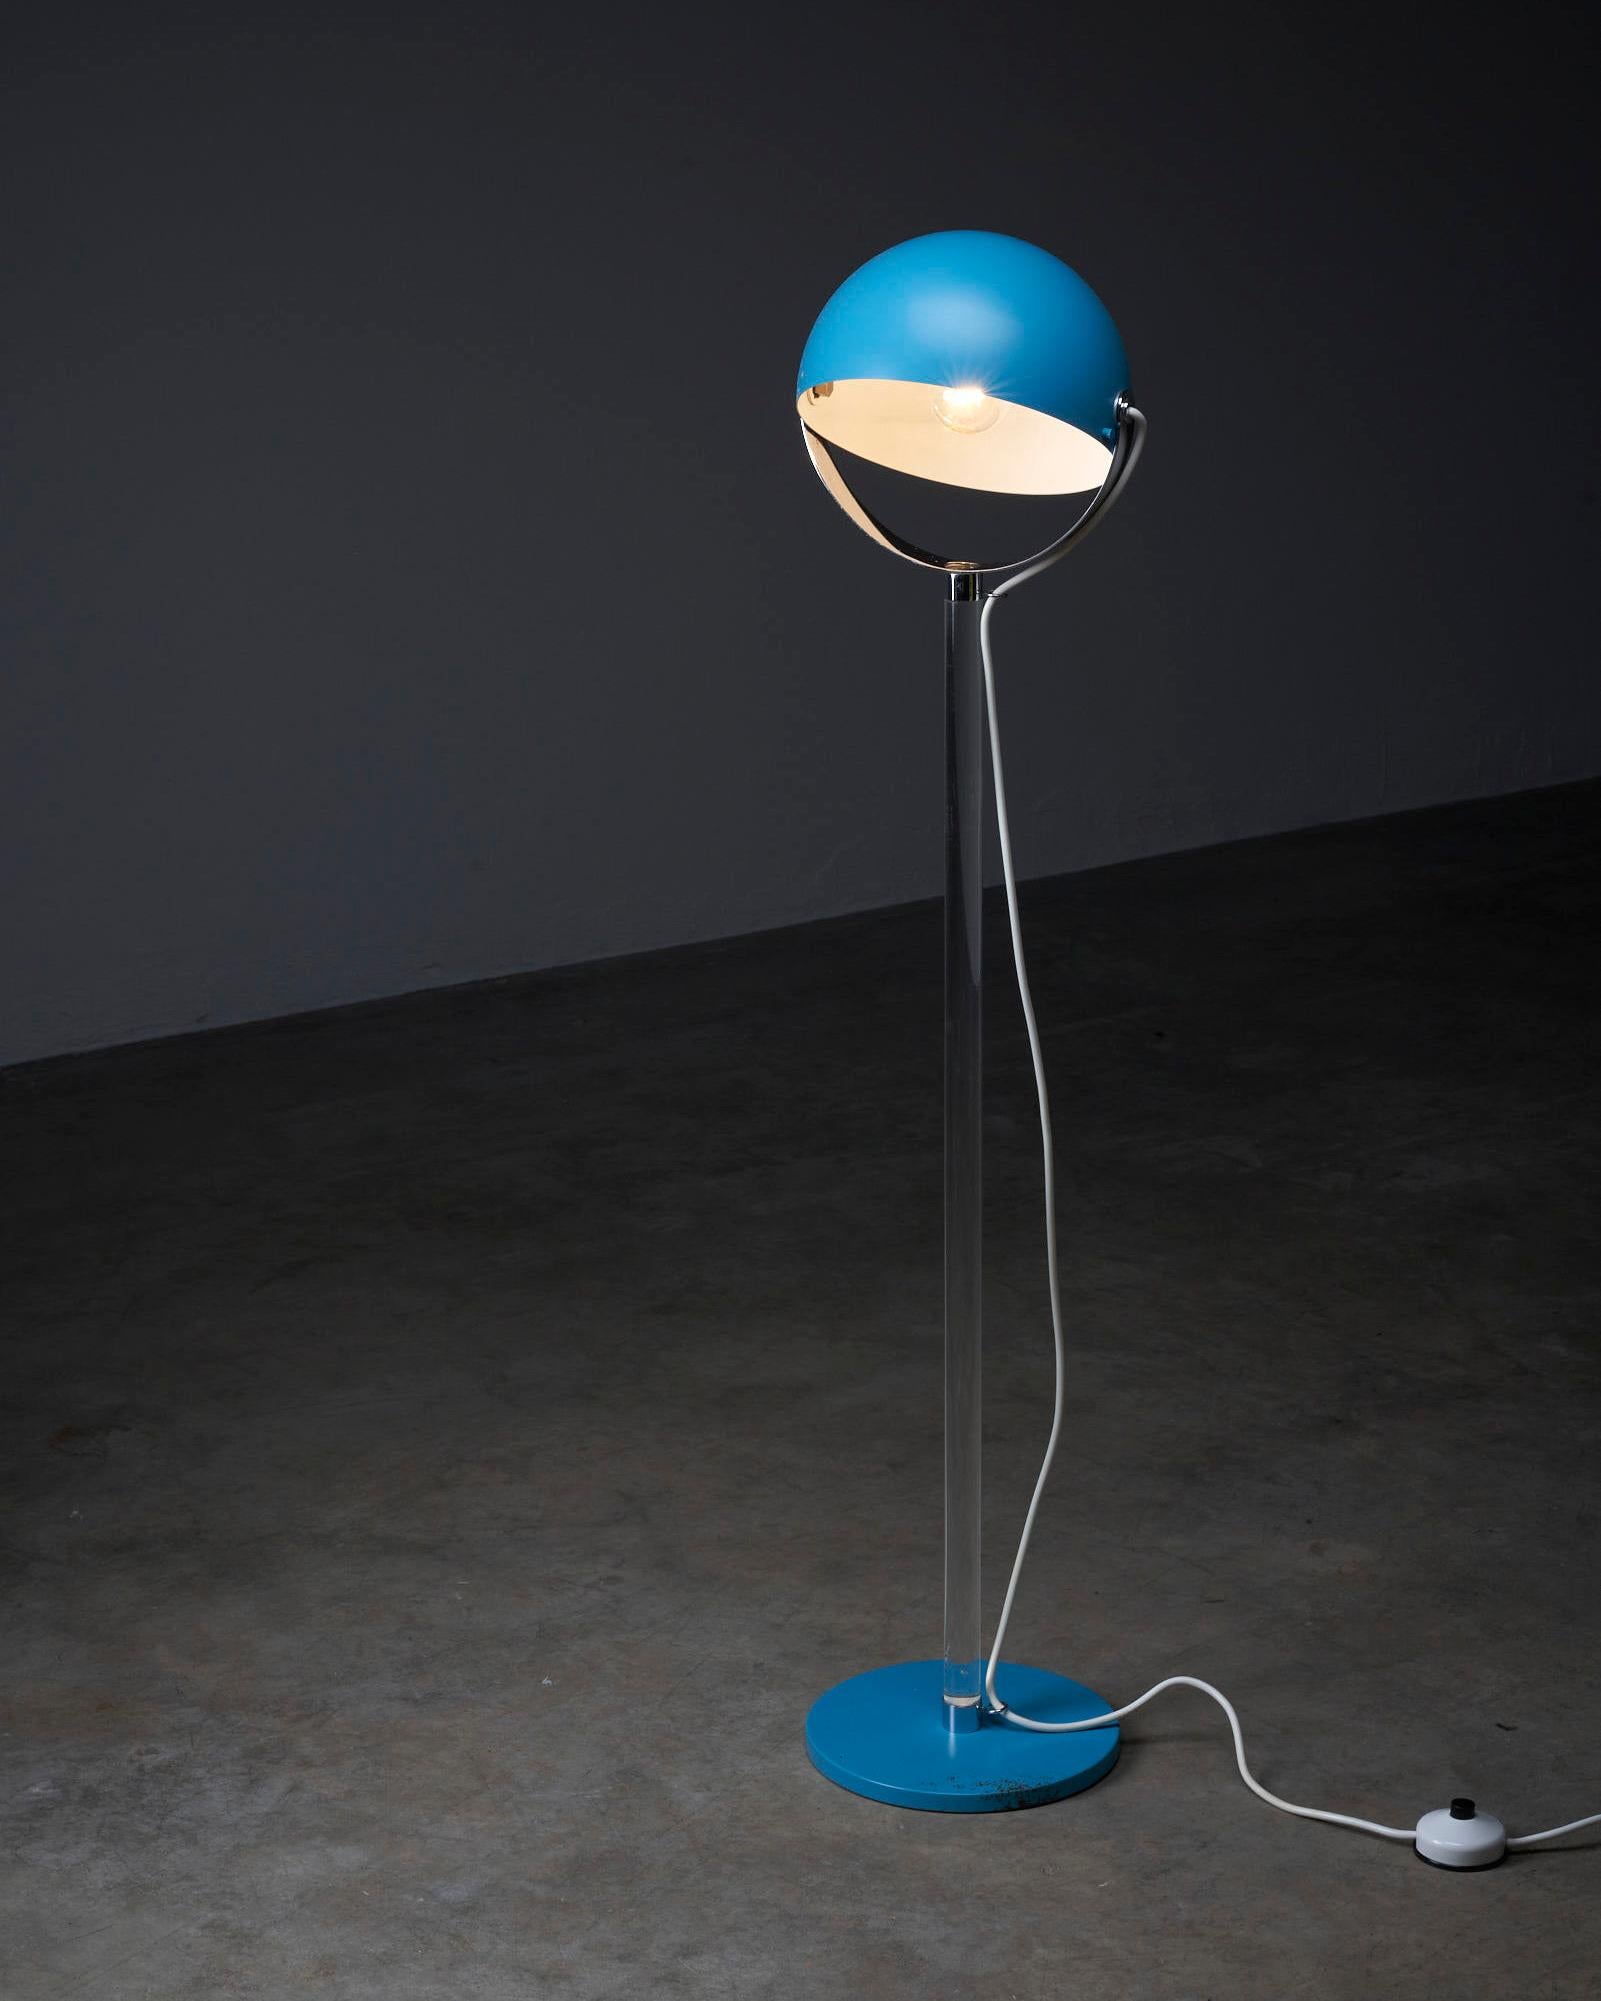 Introducing the captivating Turquoise Blue Floor Lamp by Cosack, a distinguished German lighting manufacturer. This floor lamp boasts a unique design that is sure to make a statement in any space.

The lamp features a stunning plexiglass stem, which